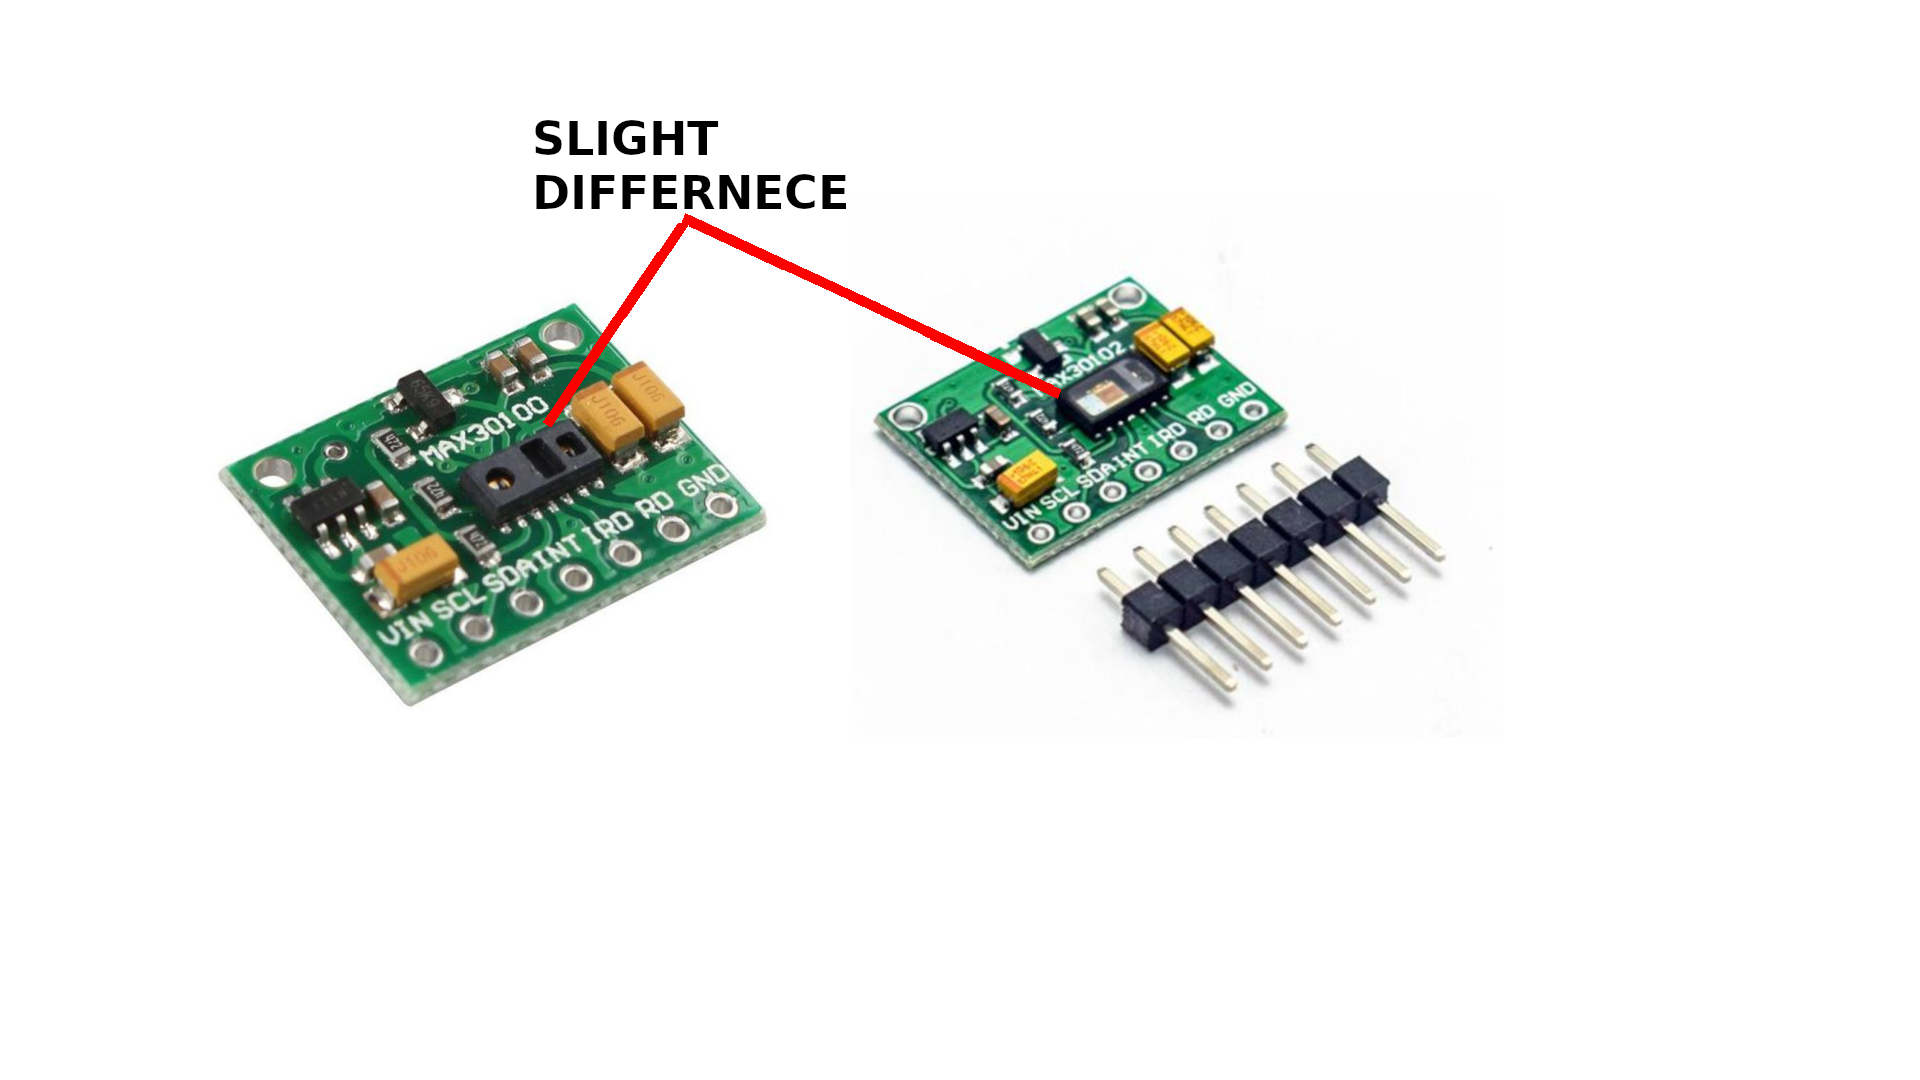 PCB Difference between MAX30100 and MAX30102